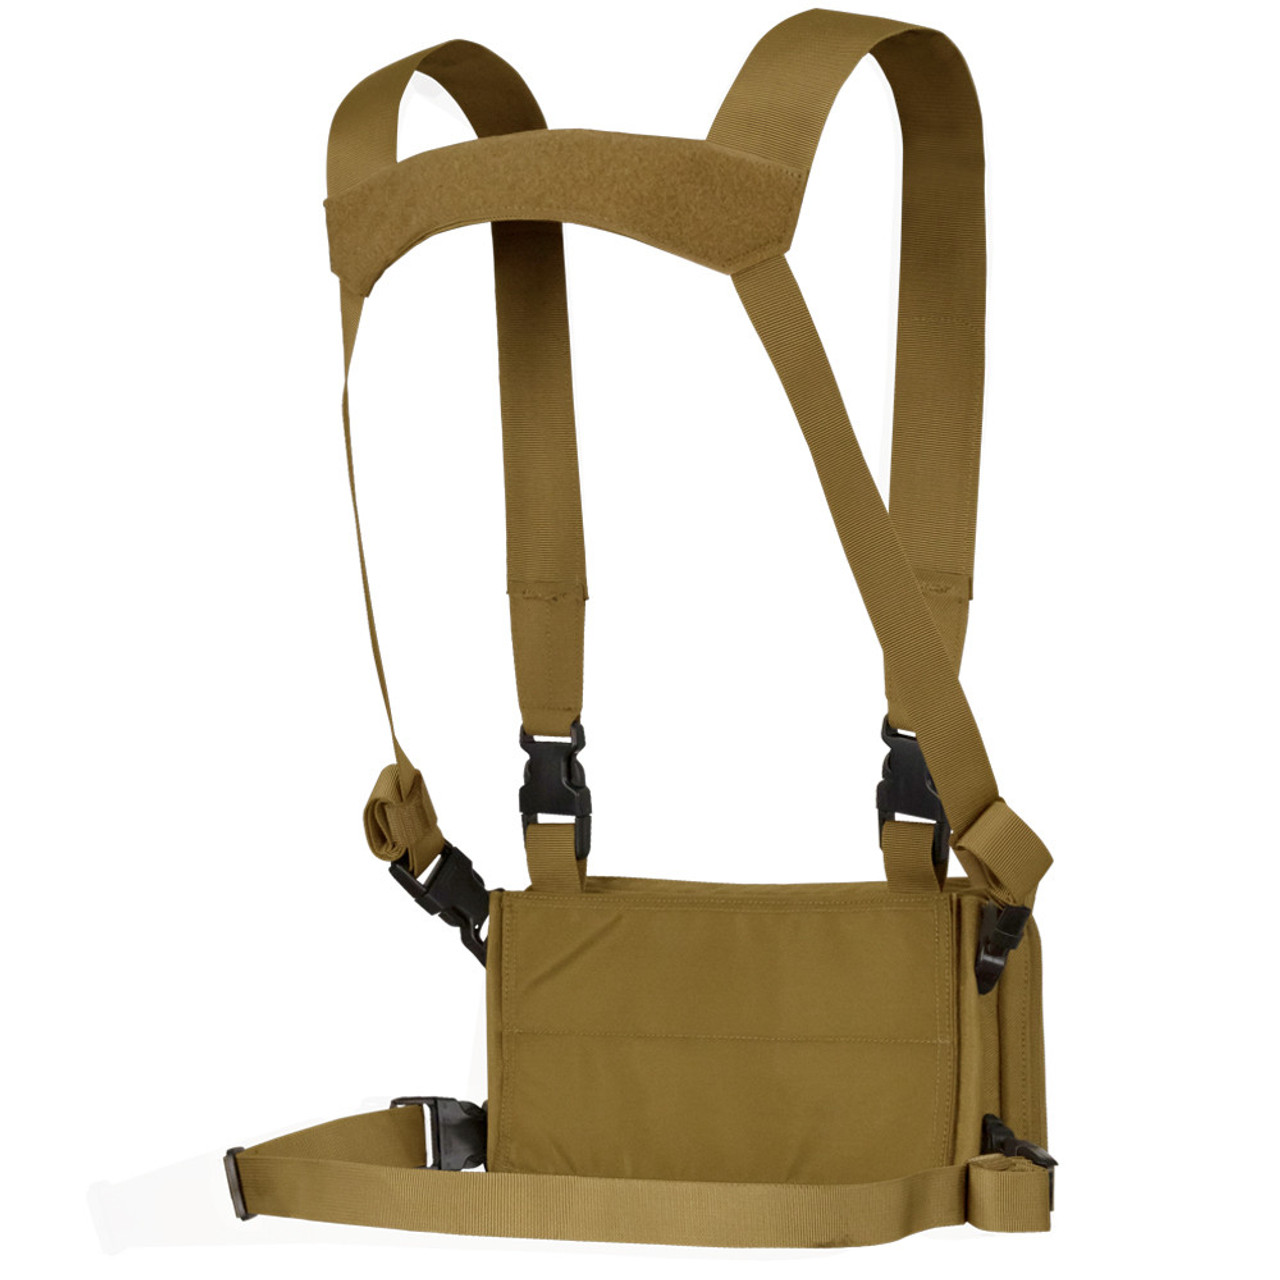 Condor Stowaway Chest Rig - ROCKSTAR Tactical Systems